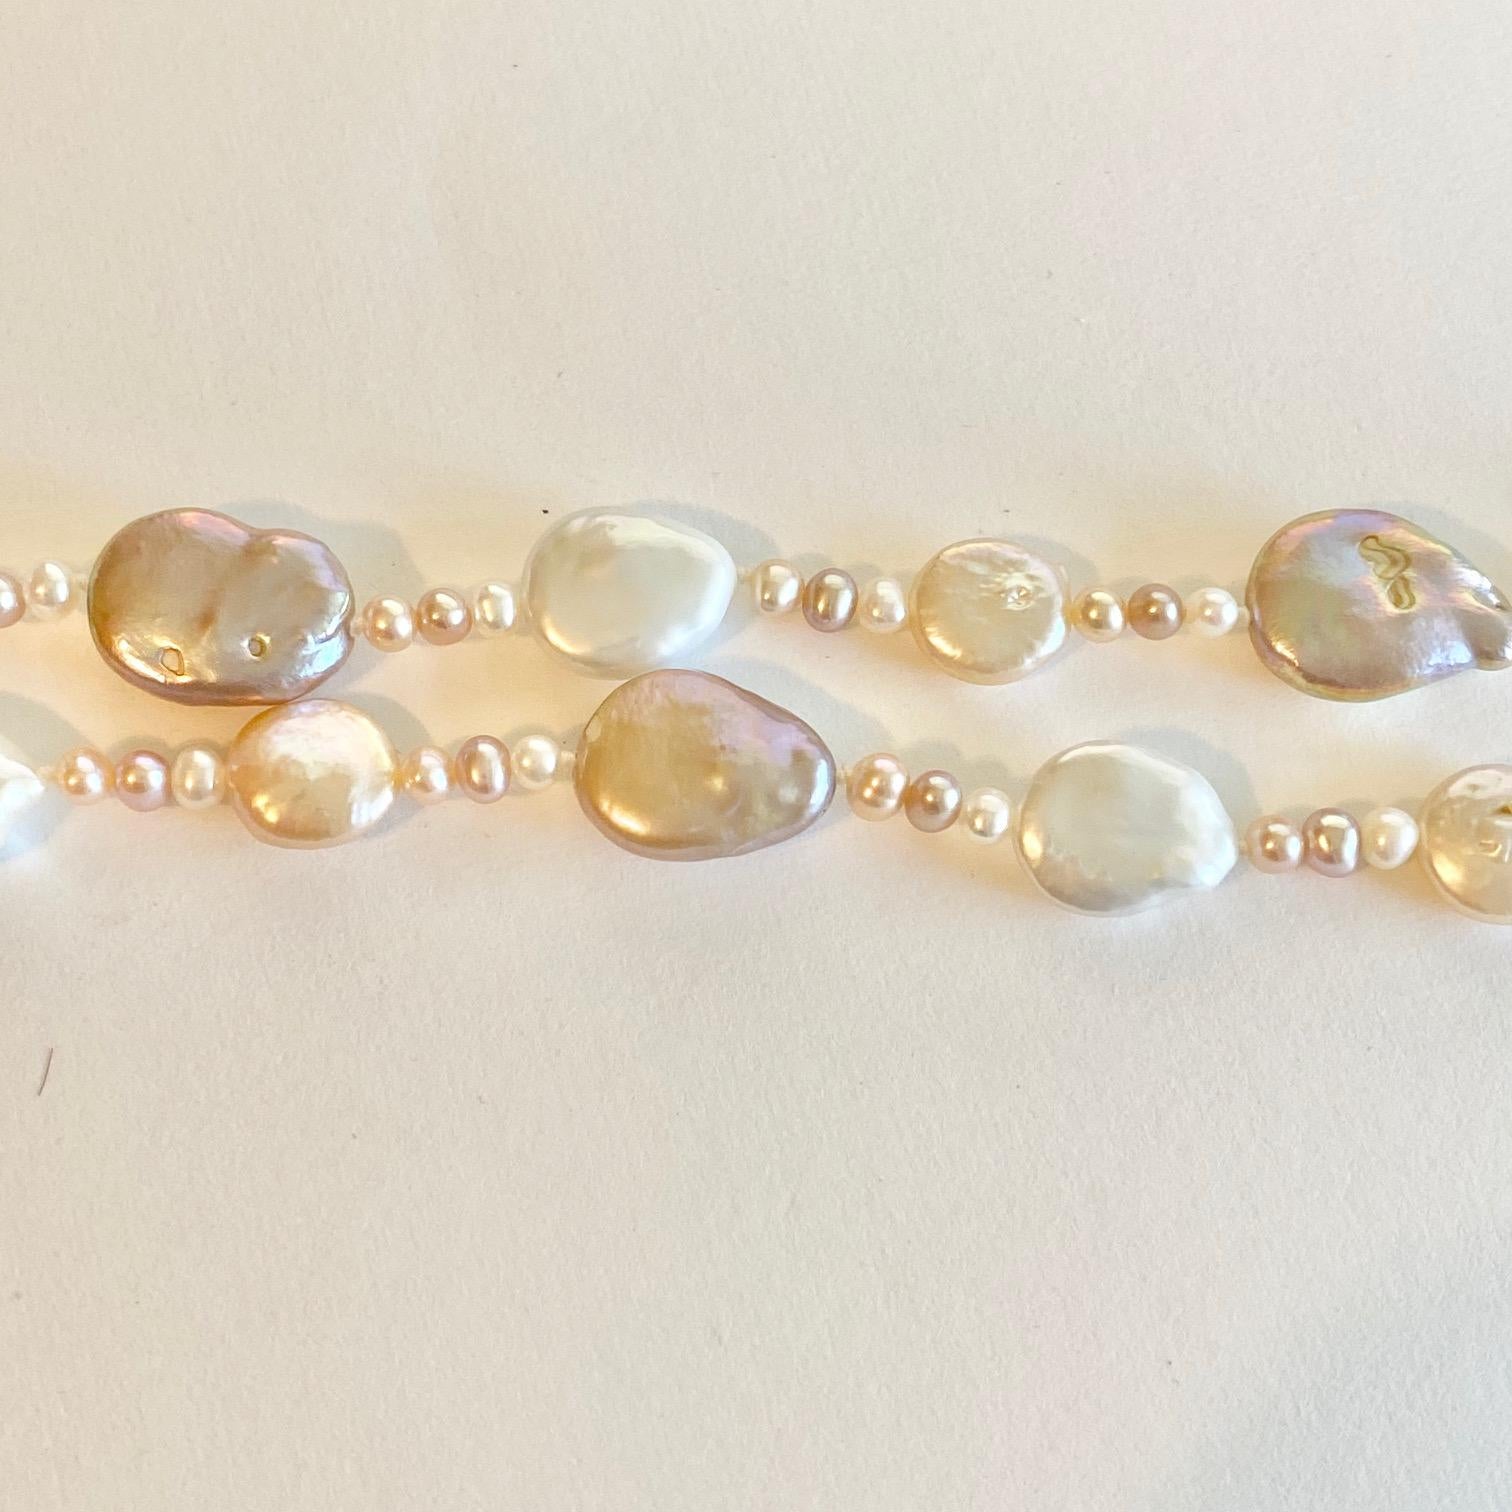 Modern Genuine Rose Pearl Strand Necklace with Baroque and Rd Pearls, Cultured Pearls